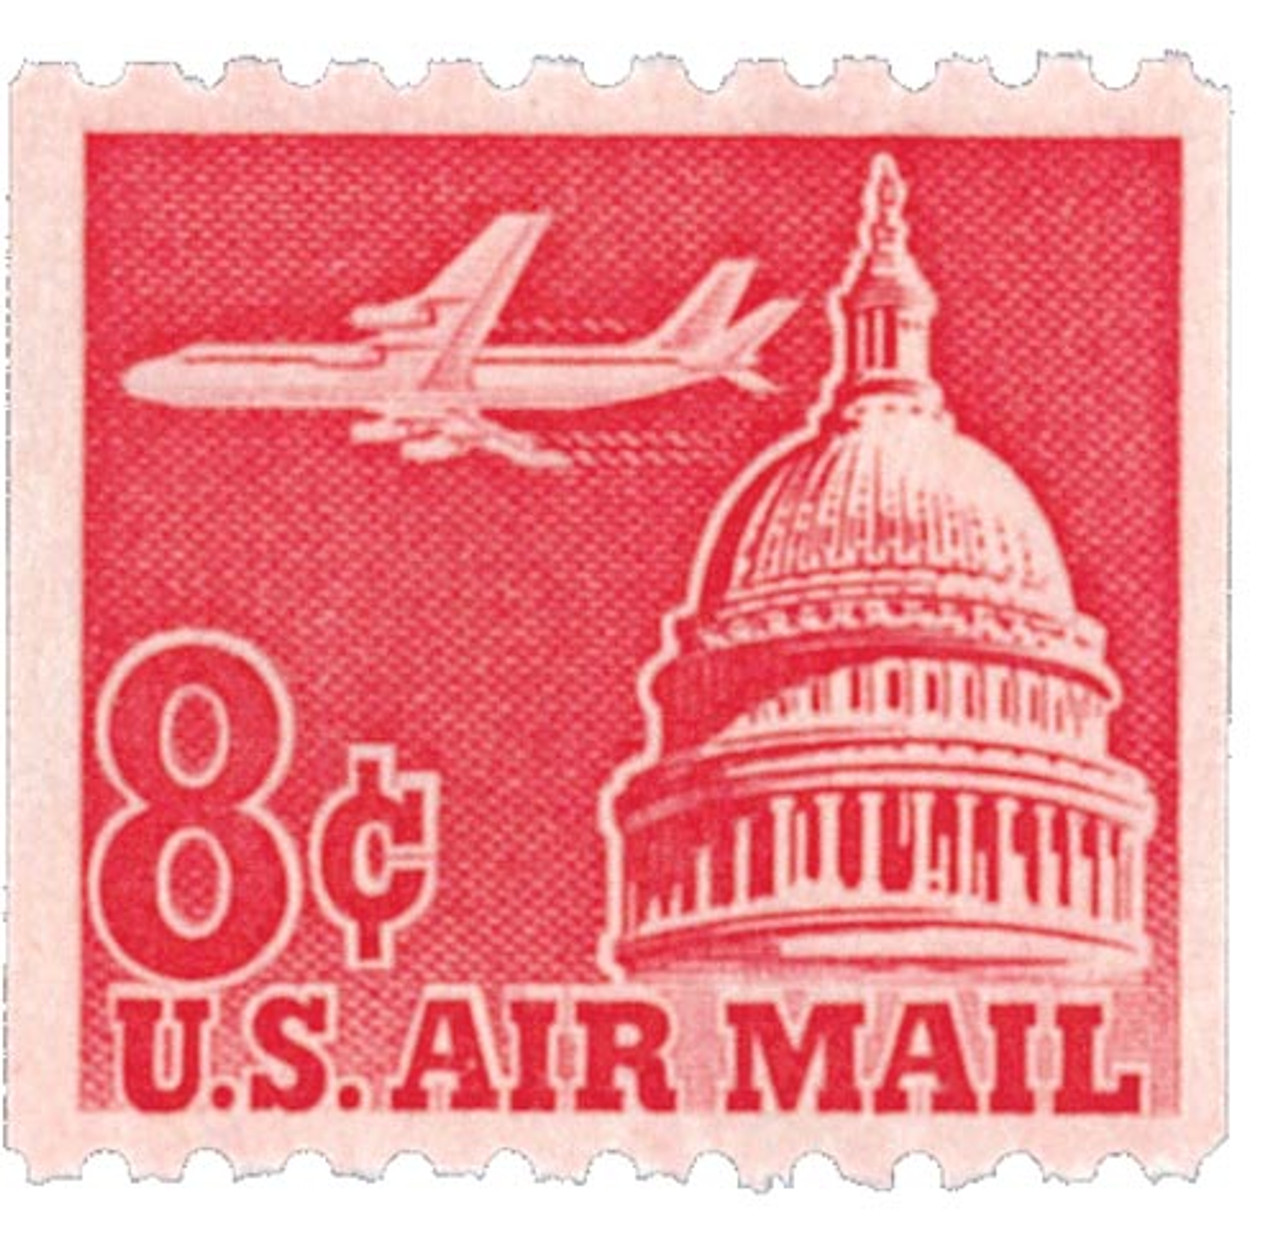 Cross-country Flight .. PREMIUM .. Unused Vintage US Postage Stamps .. Mail  5 Letters. San Francisco, New York City, WWII Planes, Aviation 